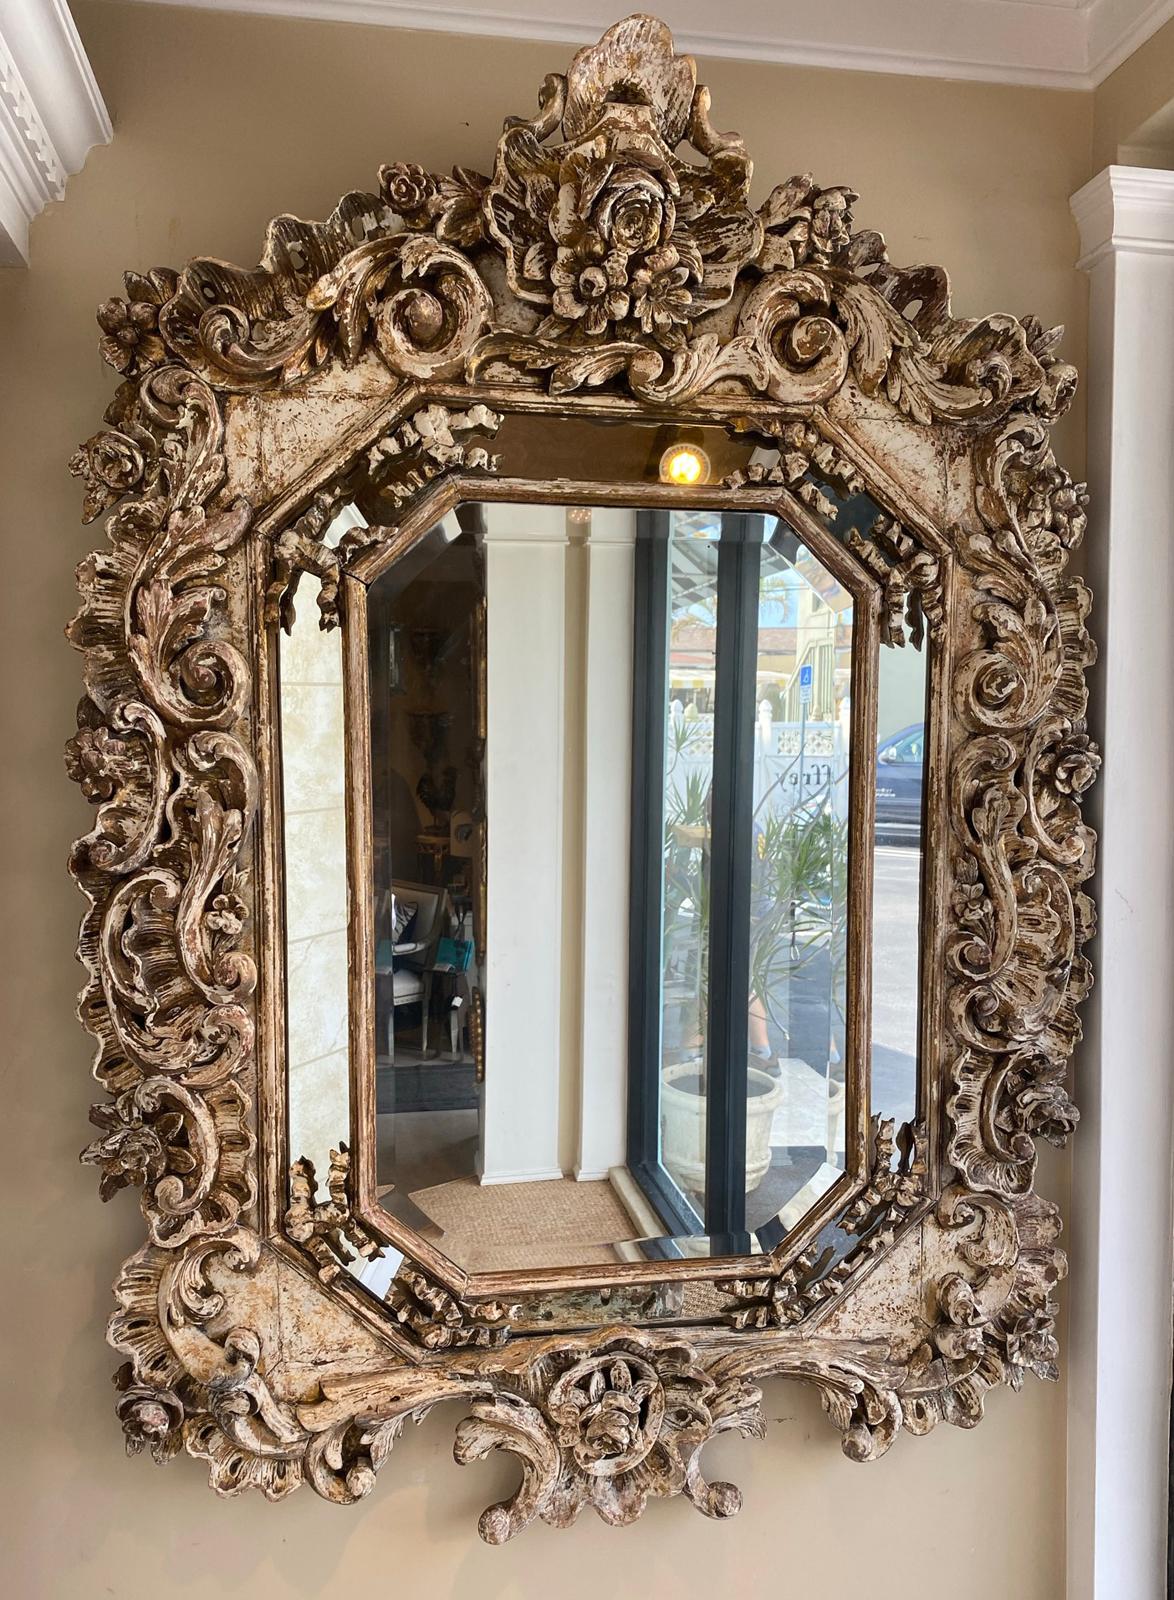 Incredibly articulated mirror, in the Rococo style; having an octagonal mirrorplate, surrounded by a mirrored relief border, inset with ribbons, framed in expansive and bountiful decorations of scrolling acanthus, rose blossoms, C-scrolls, and